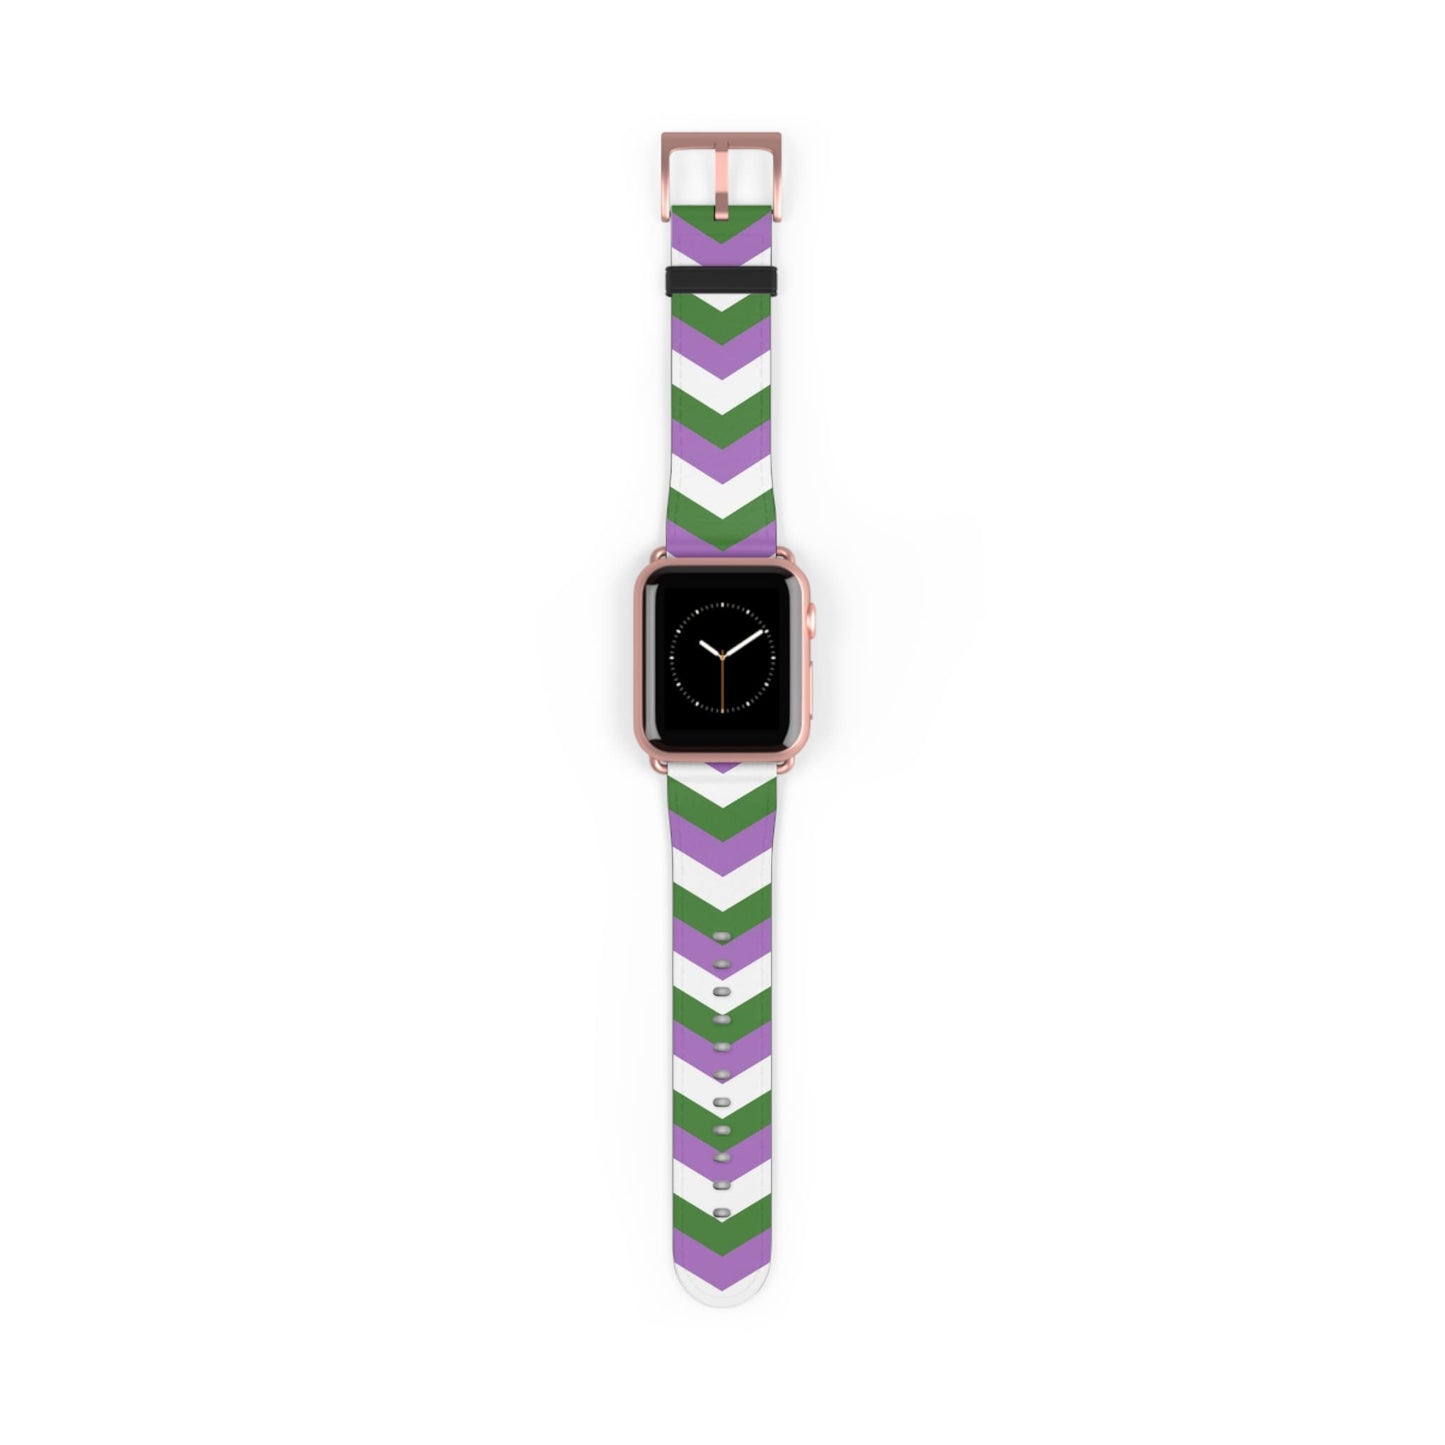 genderqueer apple watch band, discreet chevron pattern, rose gold